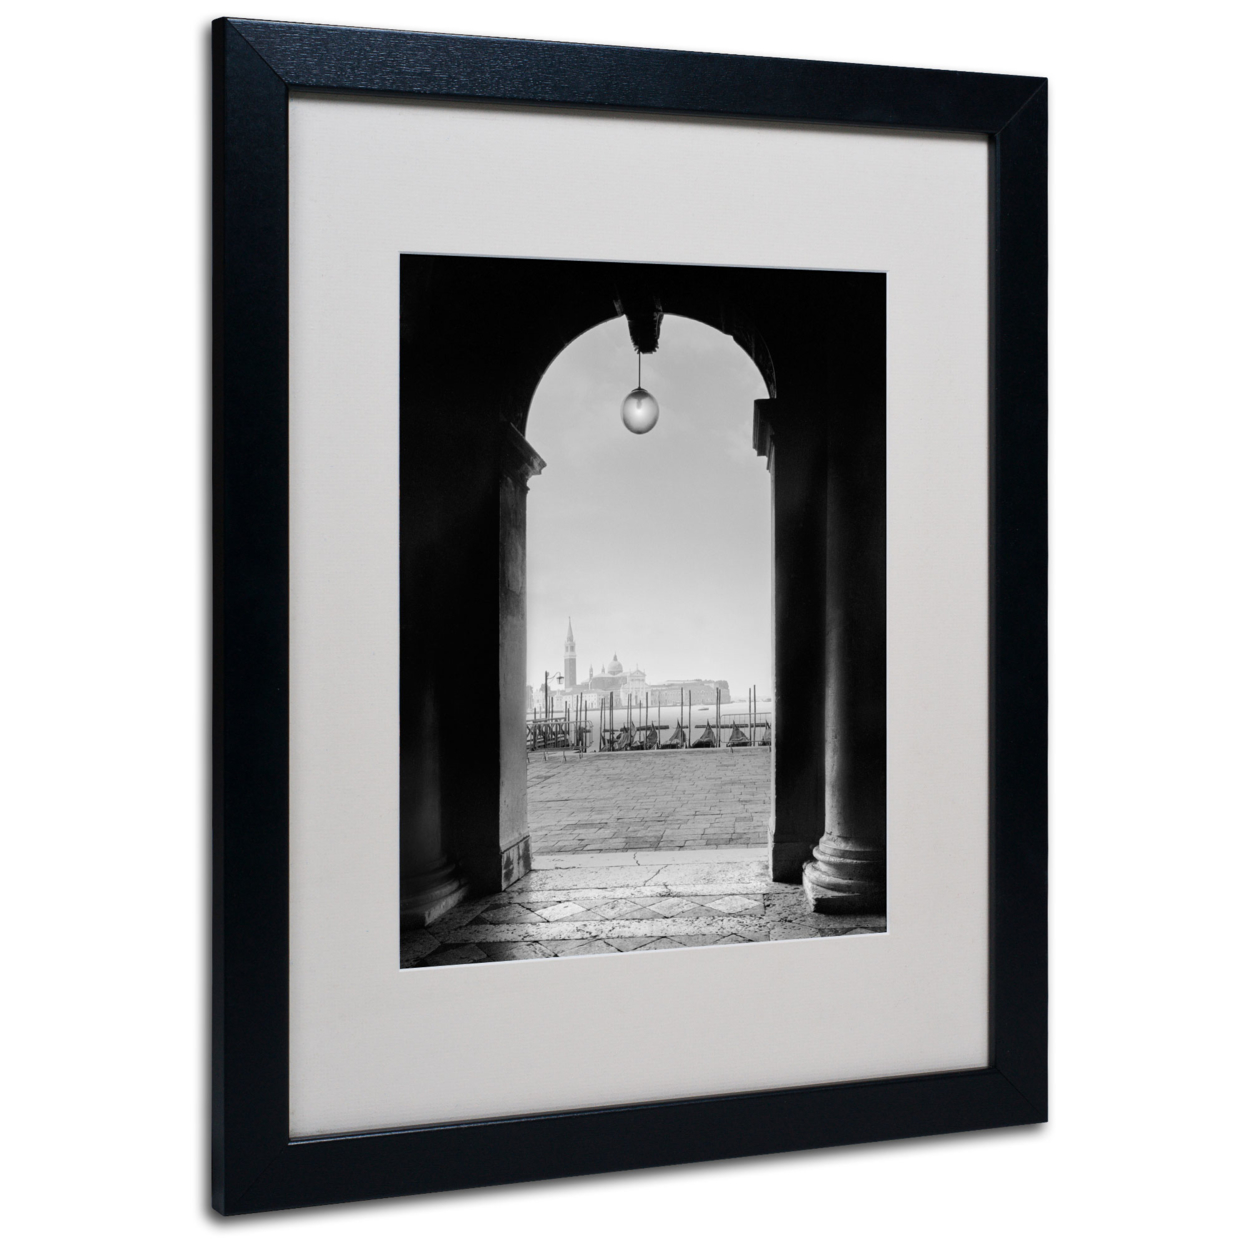 Moises Levy 'Venetia View' Black Wooden Framed Art 18 X 22 Inches